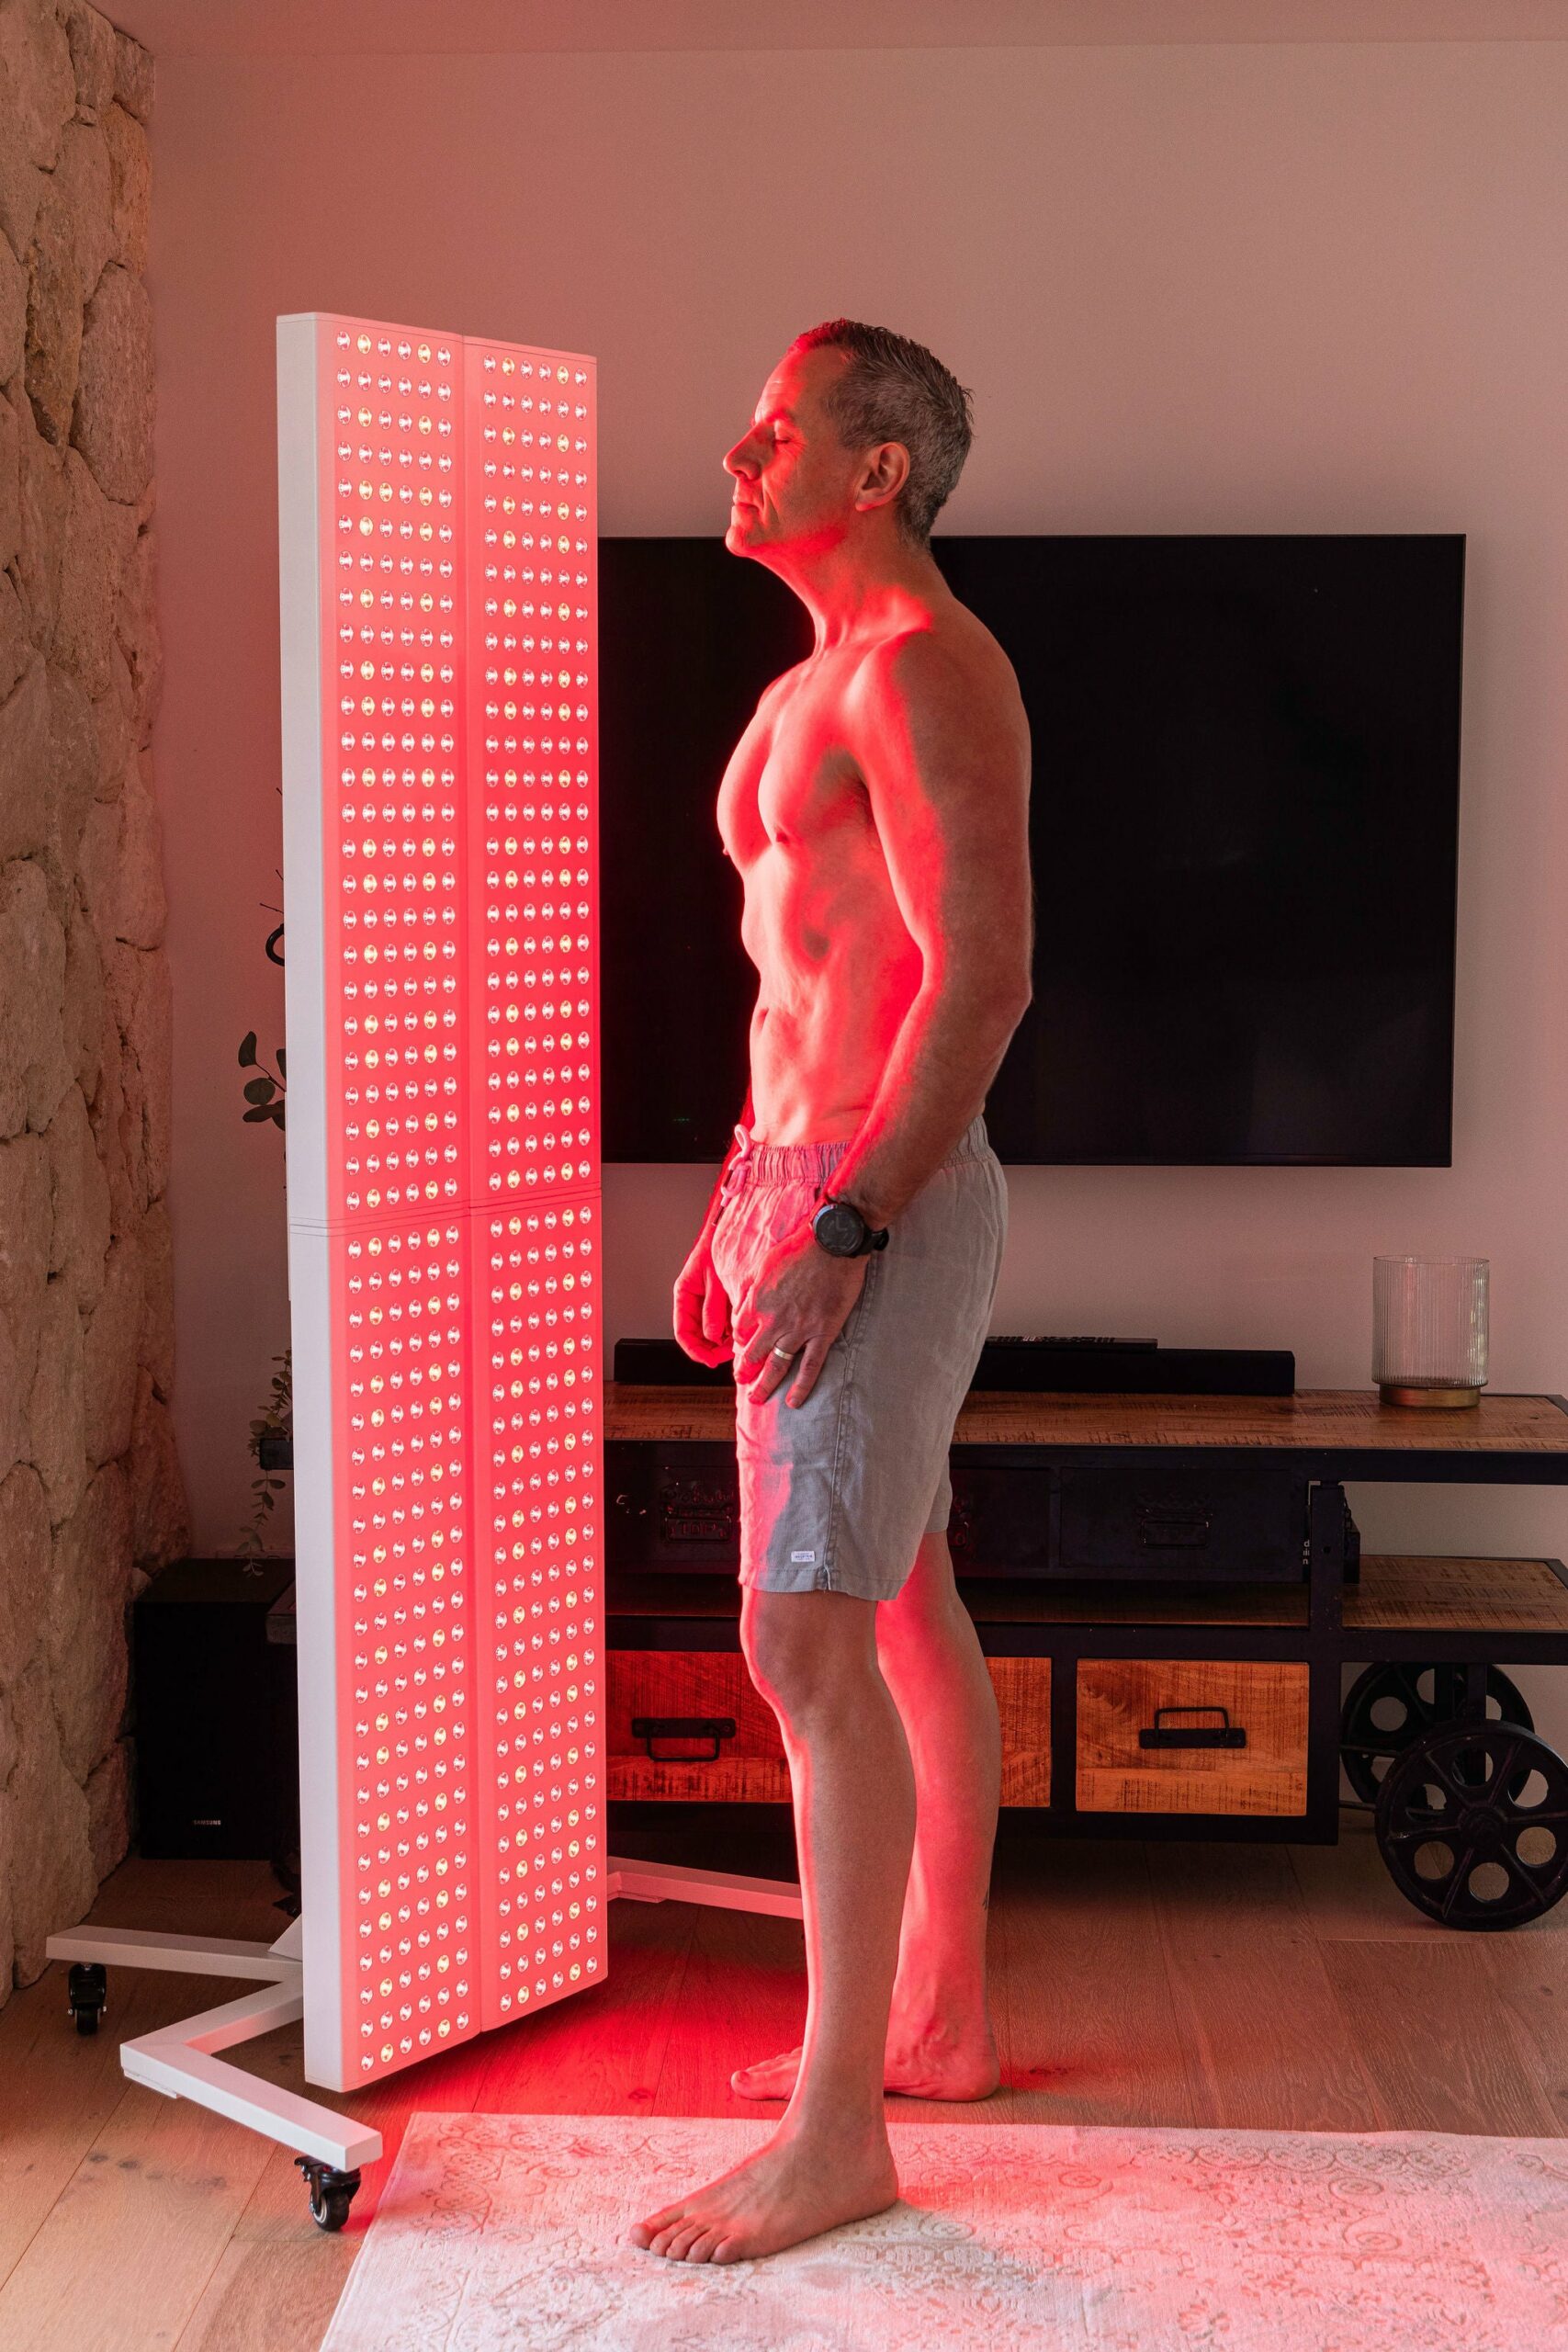 infraredi reviews scaled - Red Light Therapy News